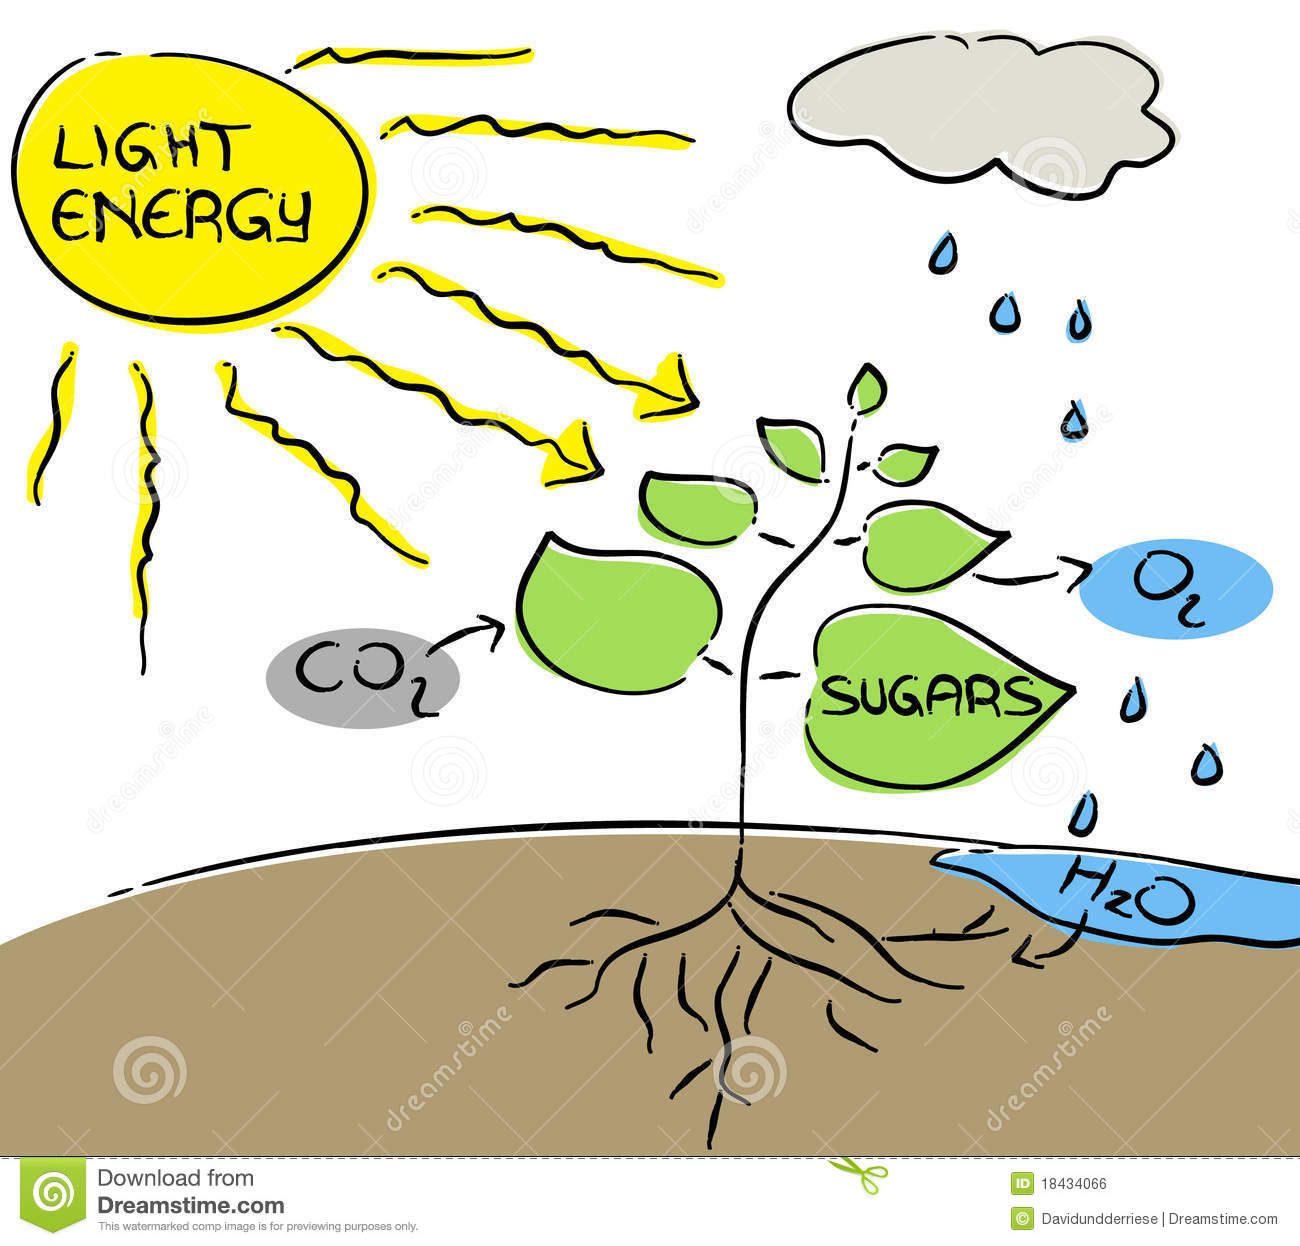 photosynthesis Clipartby ...